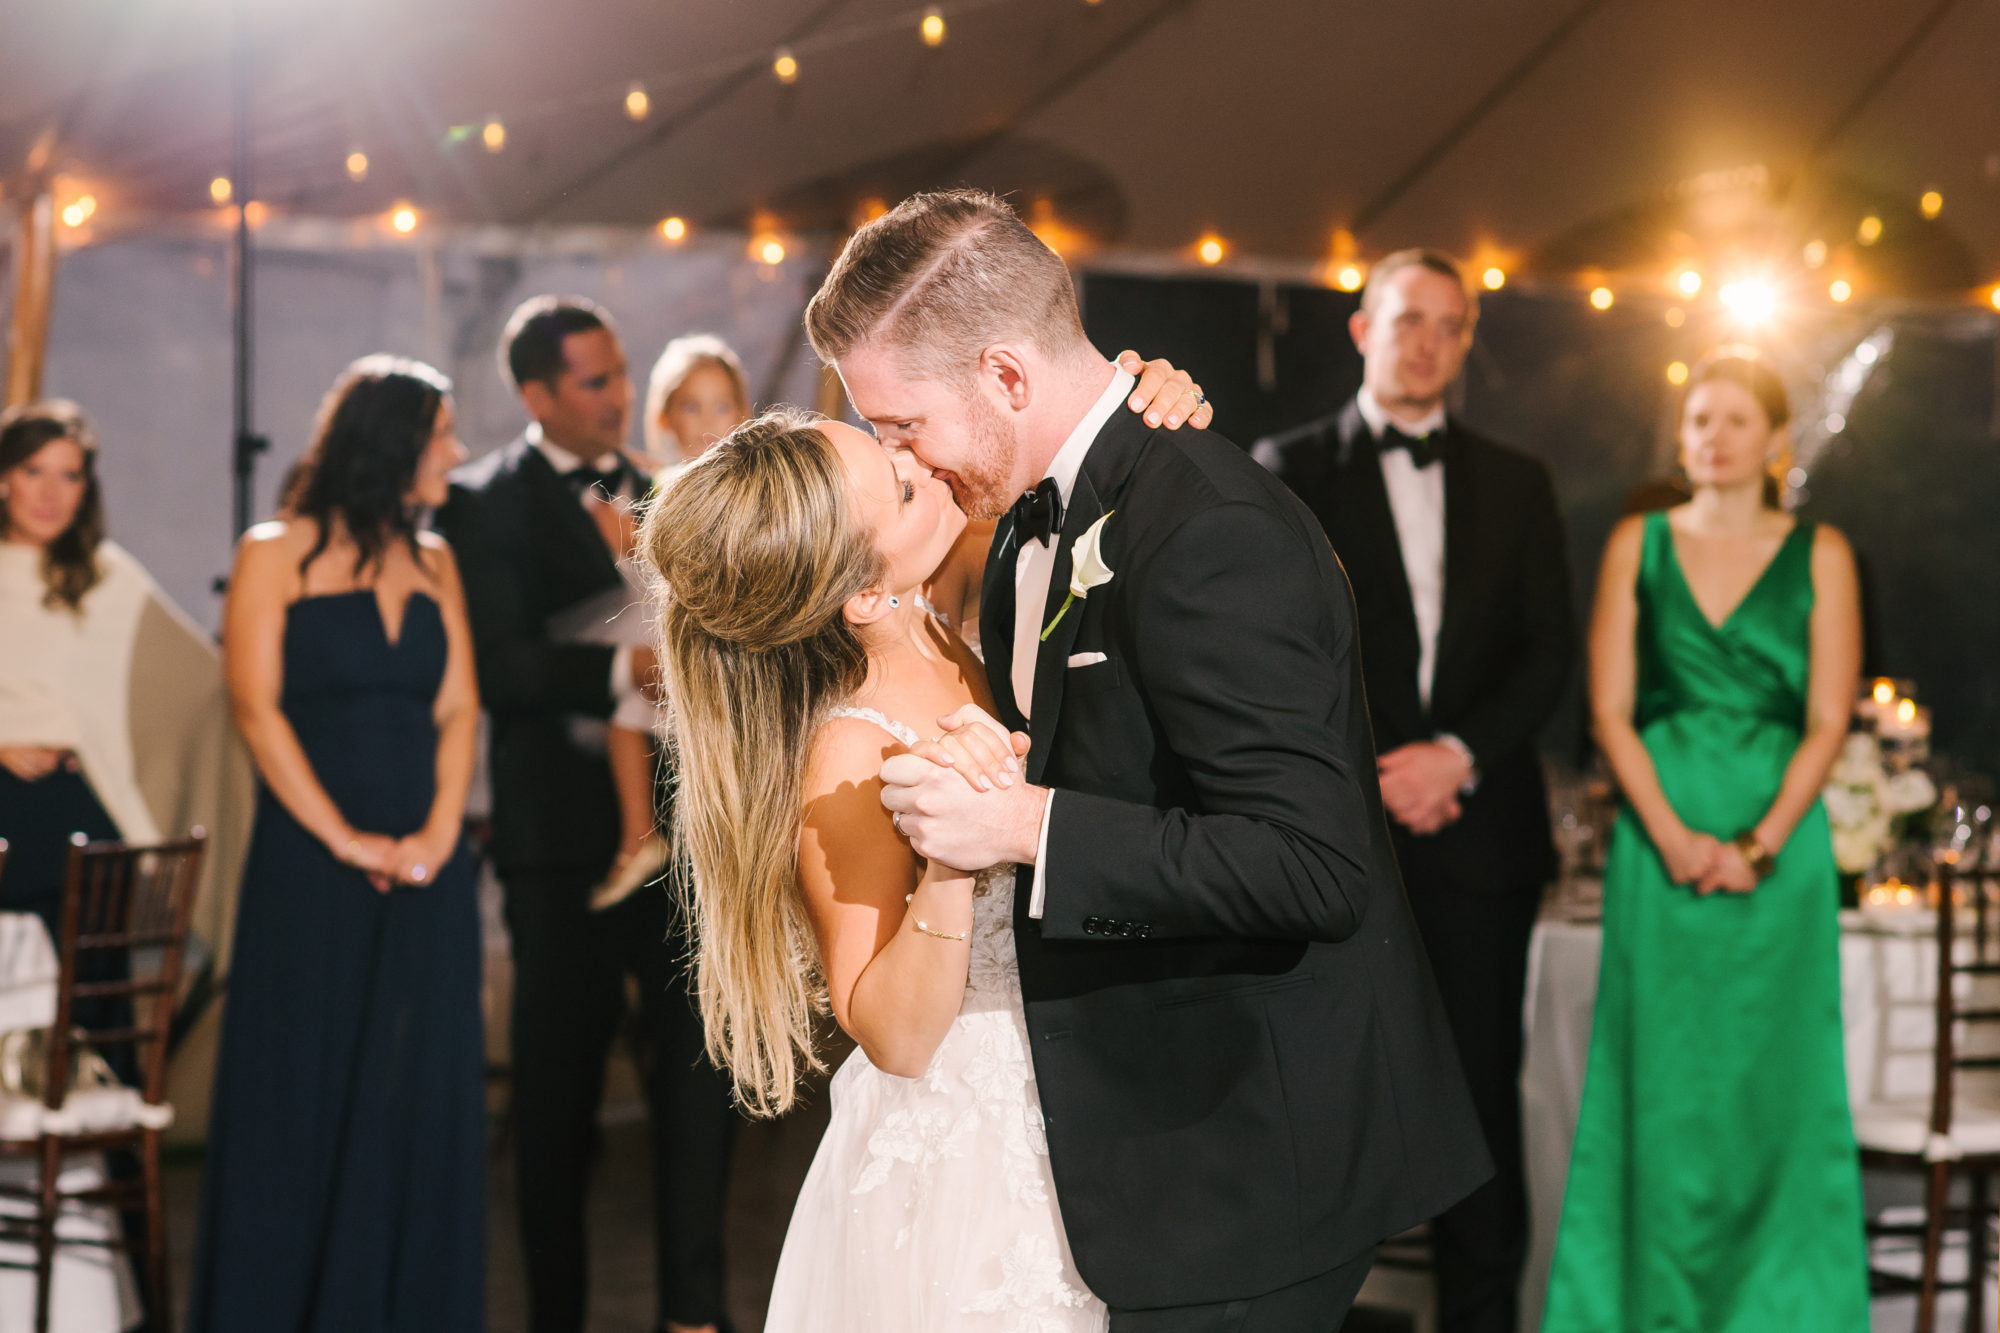 Wedding Photography Tips: How to Take Gorgeous Indoor Wedding Photos by popular New England photographer, Shannon Shipman: image of a bride and groom kissing on the dance floor. 